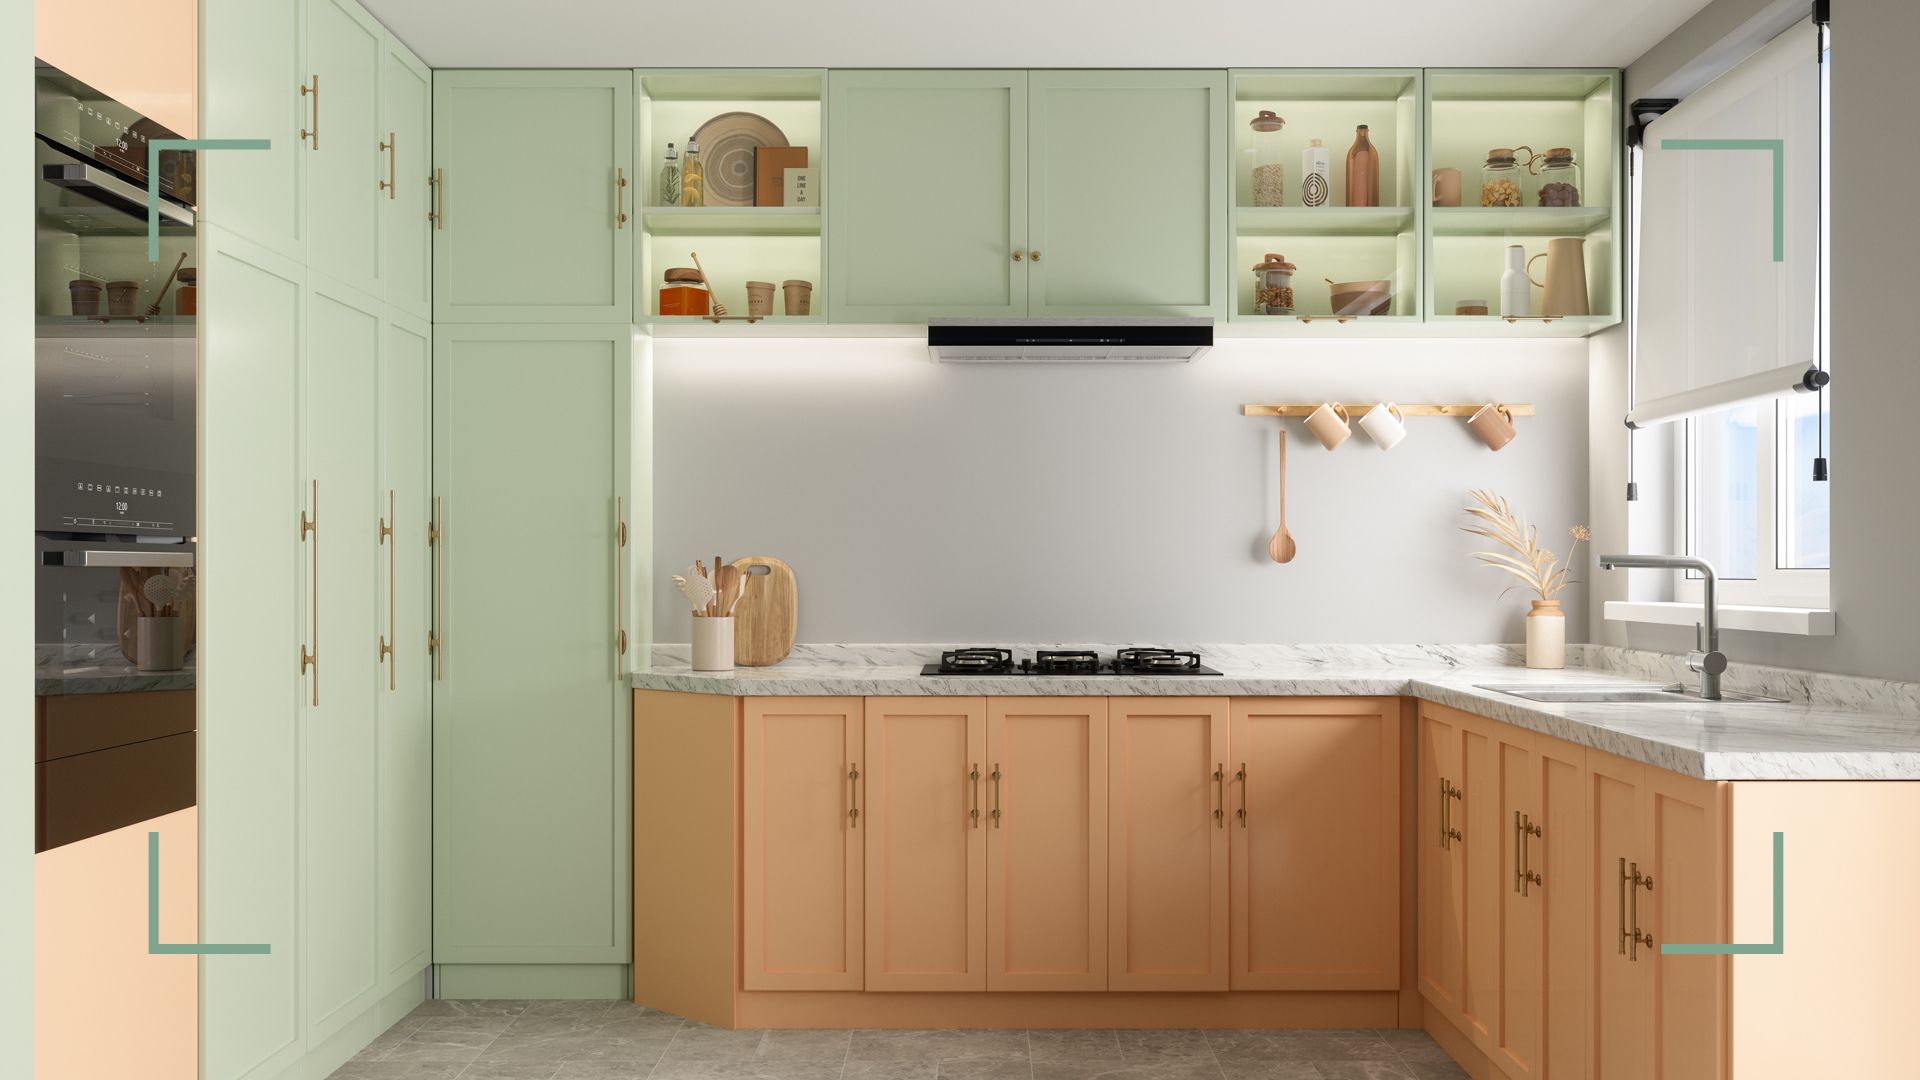 What Are The 10 Steps For Organizing Kitchen Cabinets